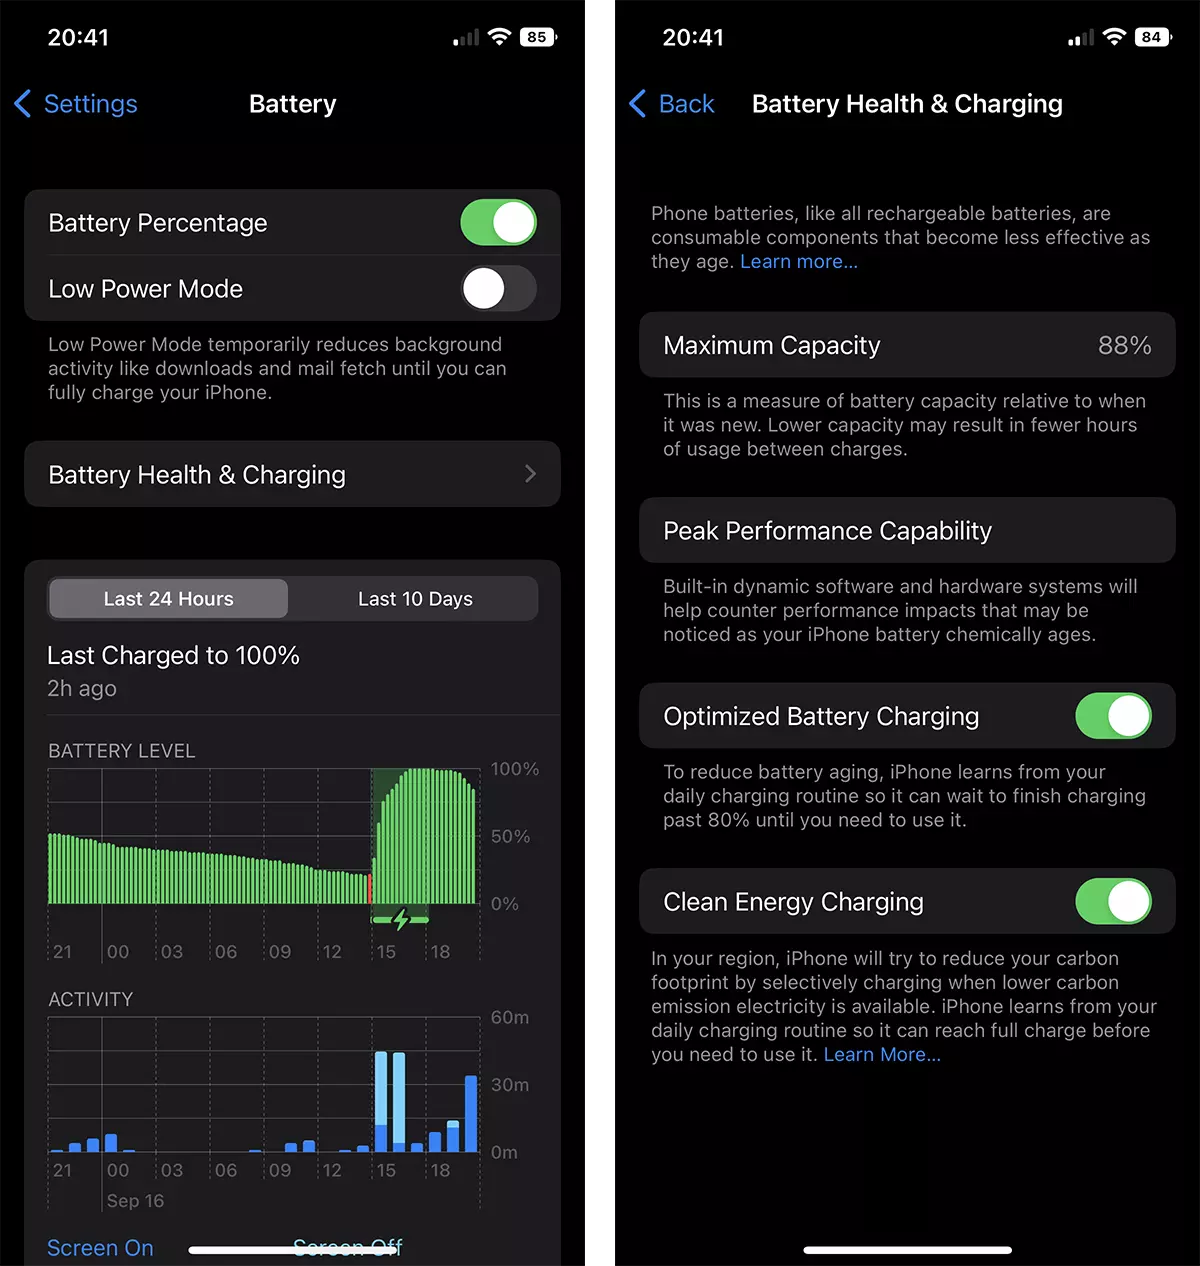 What is Clean Energy Charging on iPhone